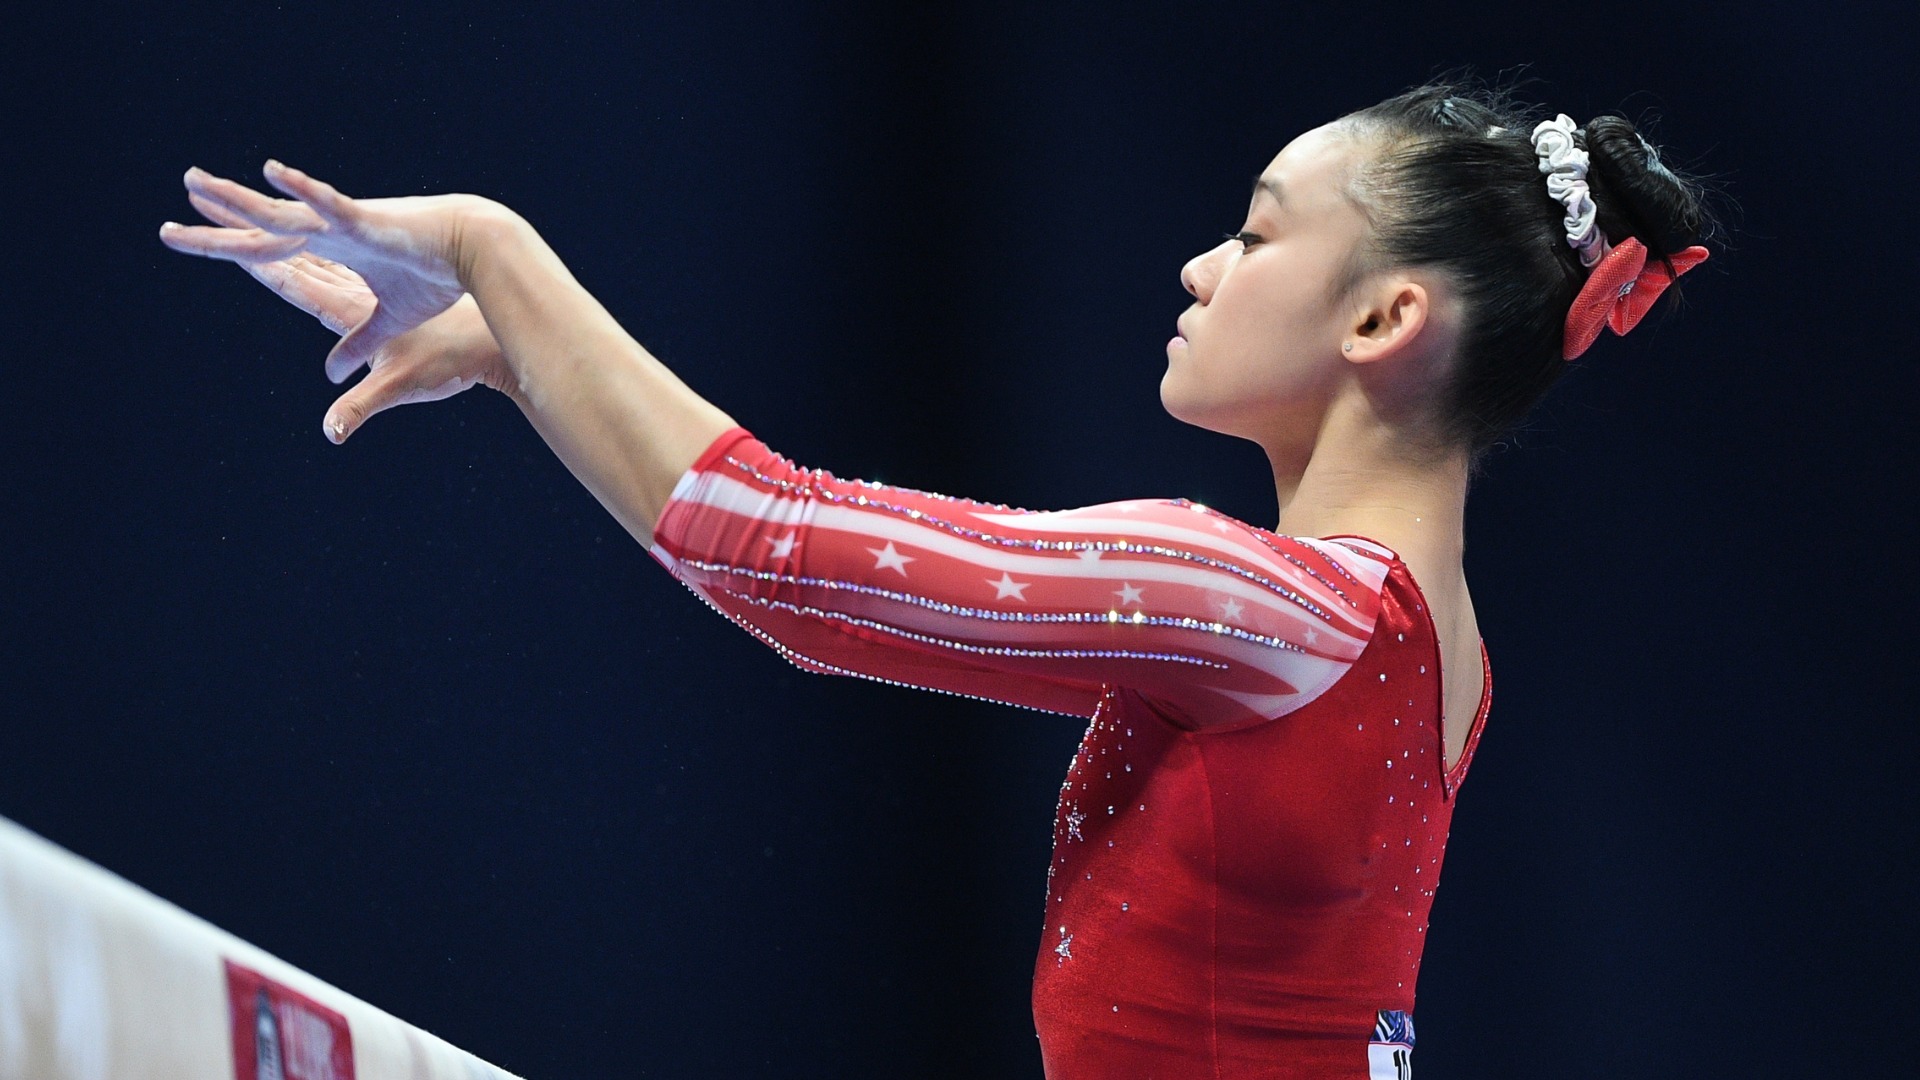 Leanne Wong prepares to compete on beam at the 2021 U.S. Olympic Trials.